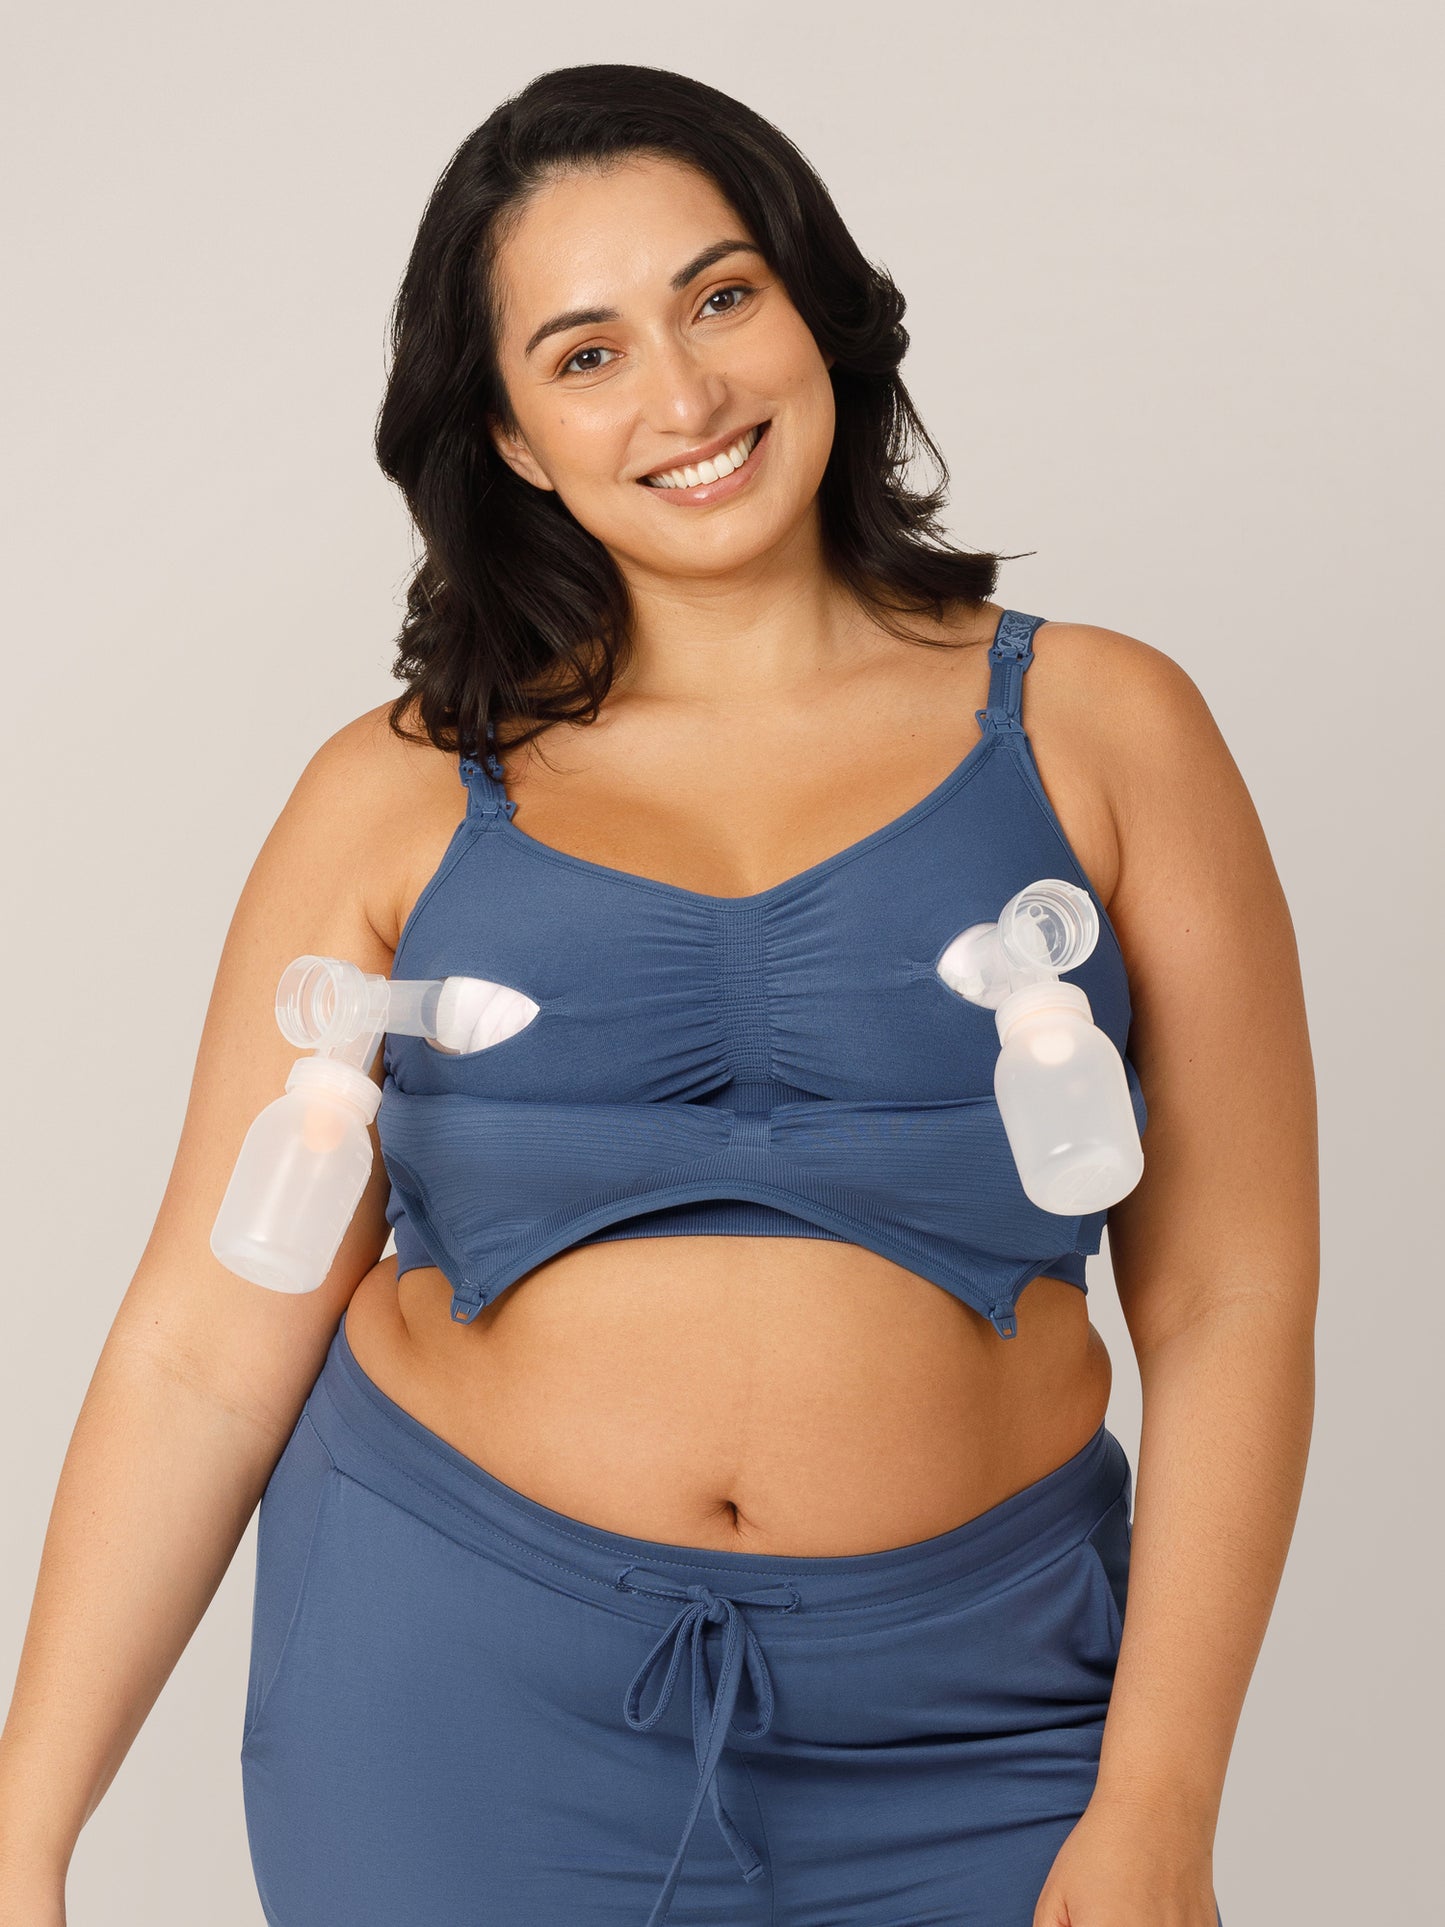 Front view of model wearing the Sublime® Hands-Free Pumping & Nursing Bra in Slate Blue in a Busty fit with pump flanges inserted.